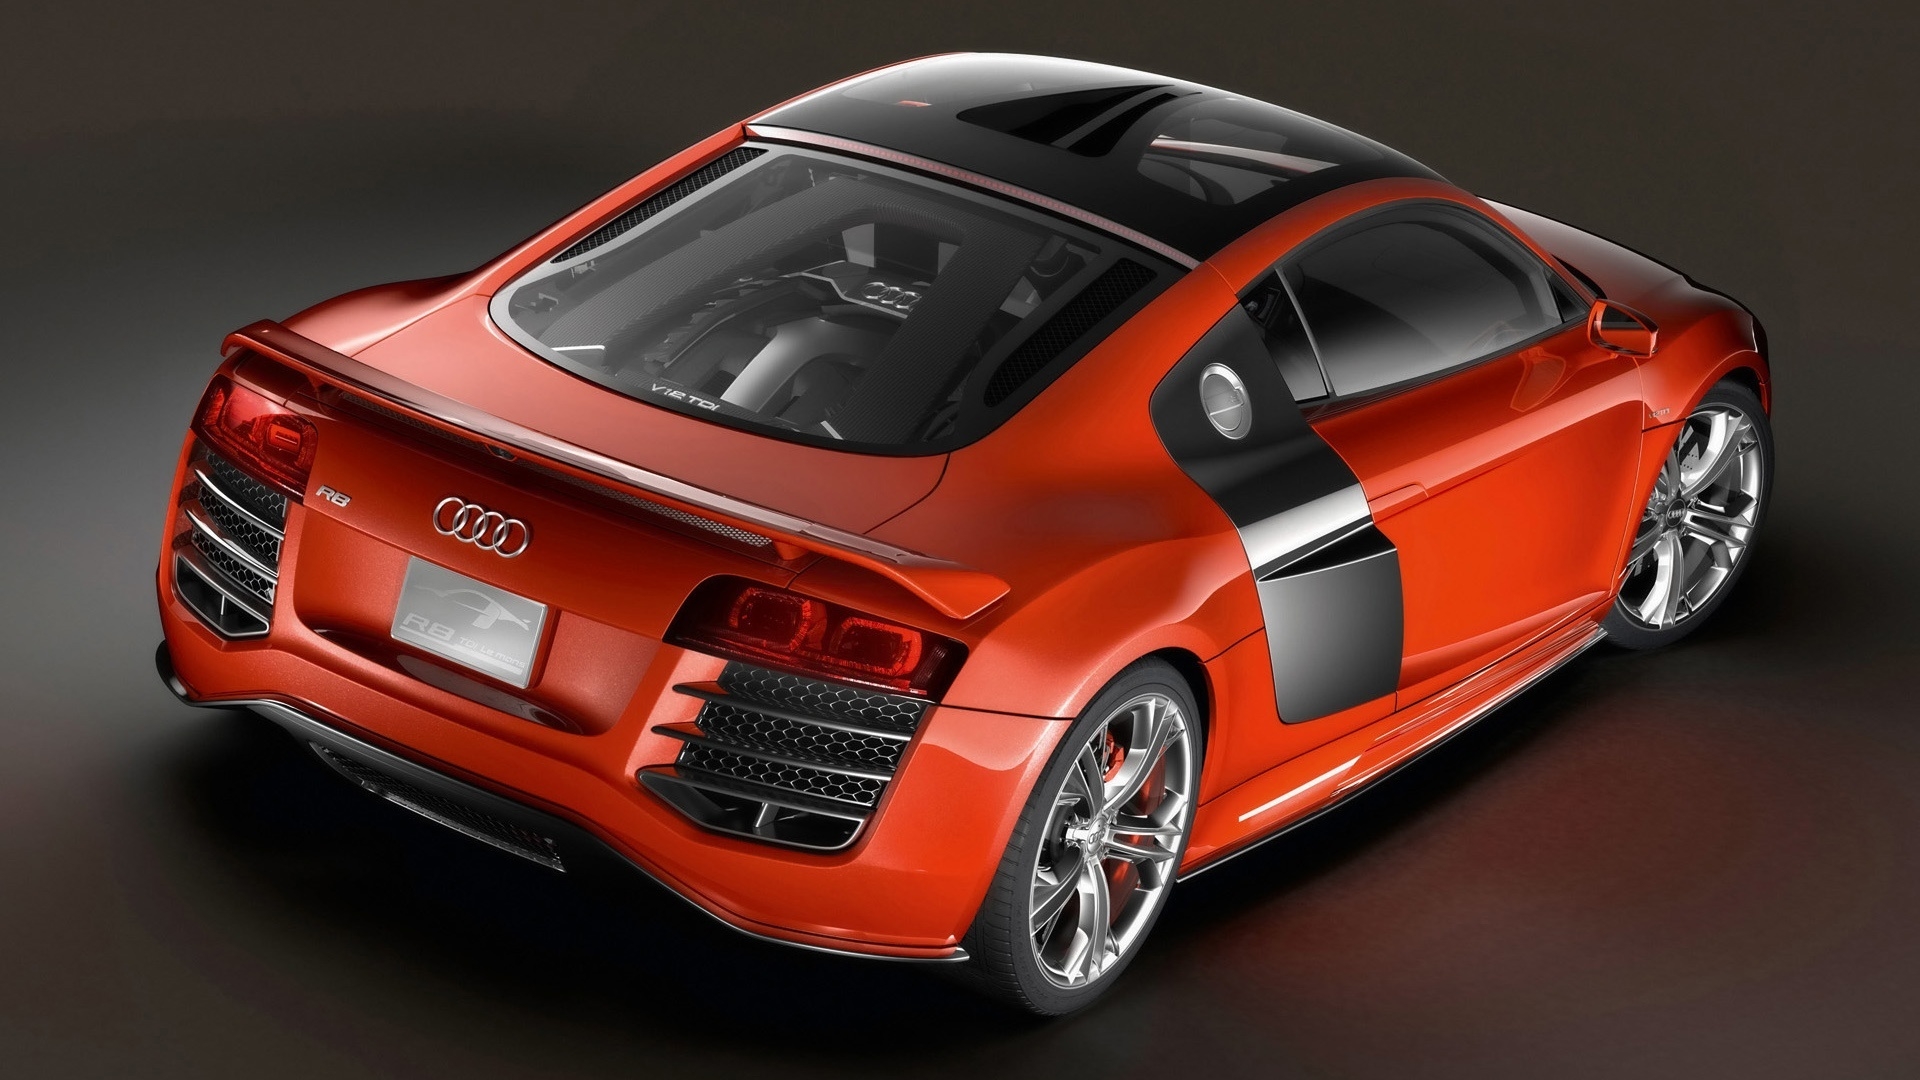 Audi R8 Outstanding Torque Rear for 1920 x 1080 HDTV 1080p resolution